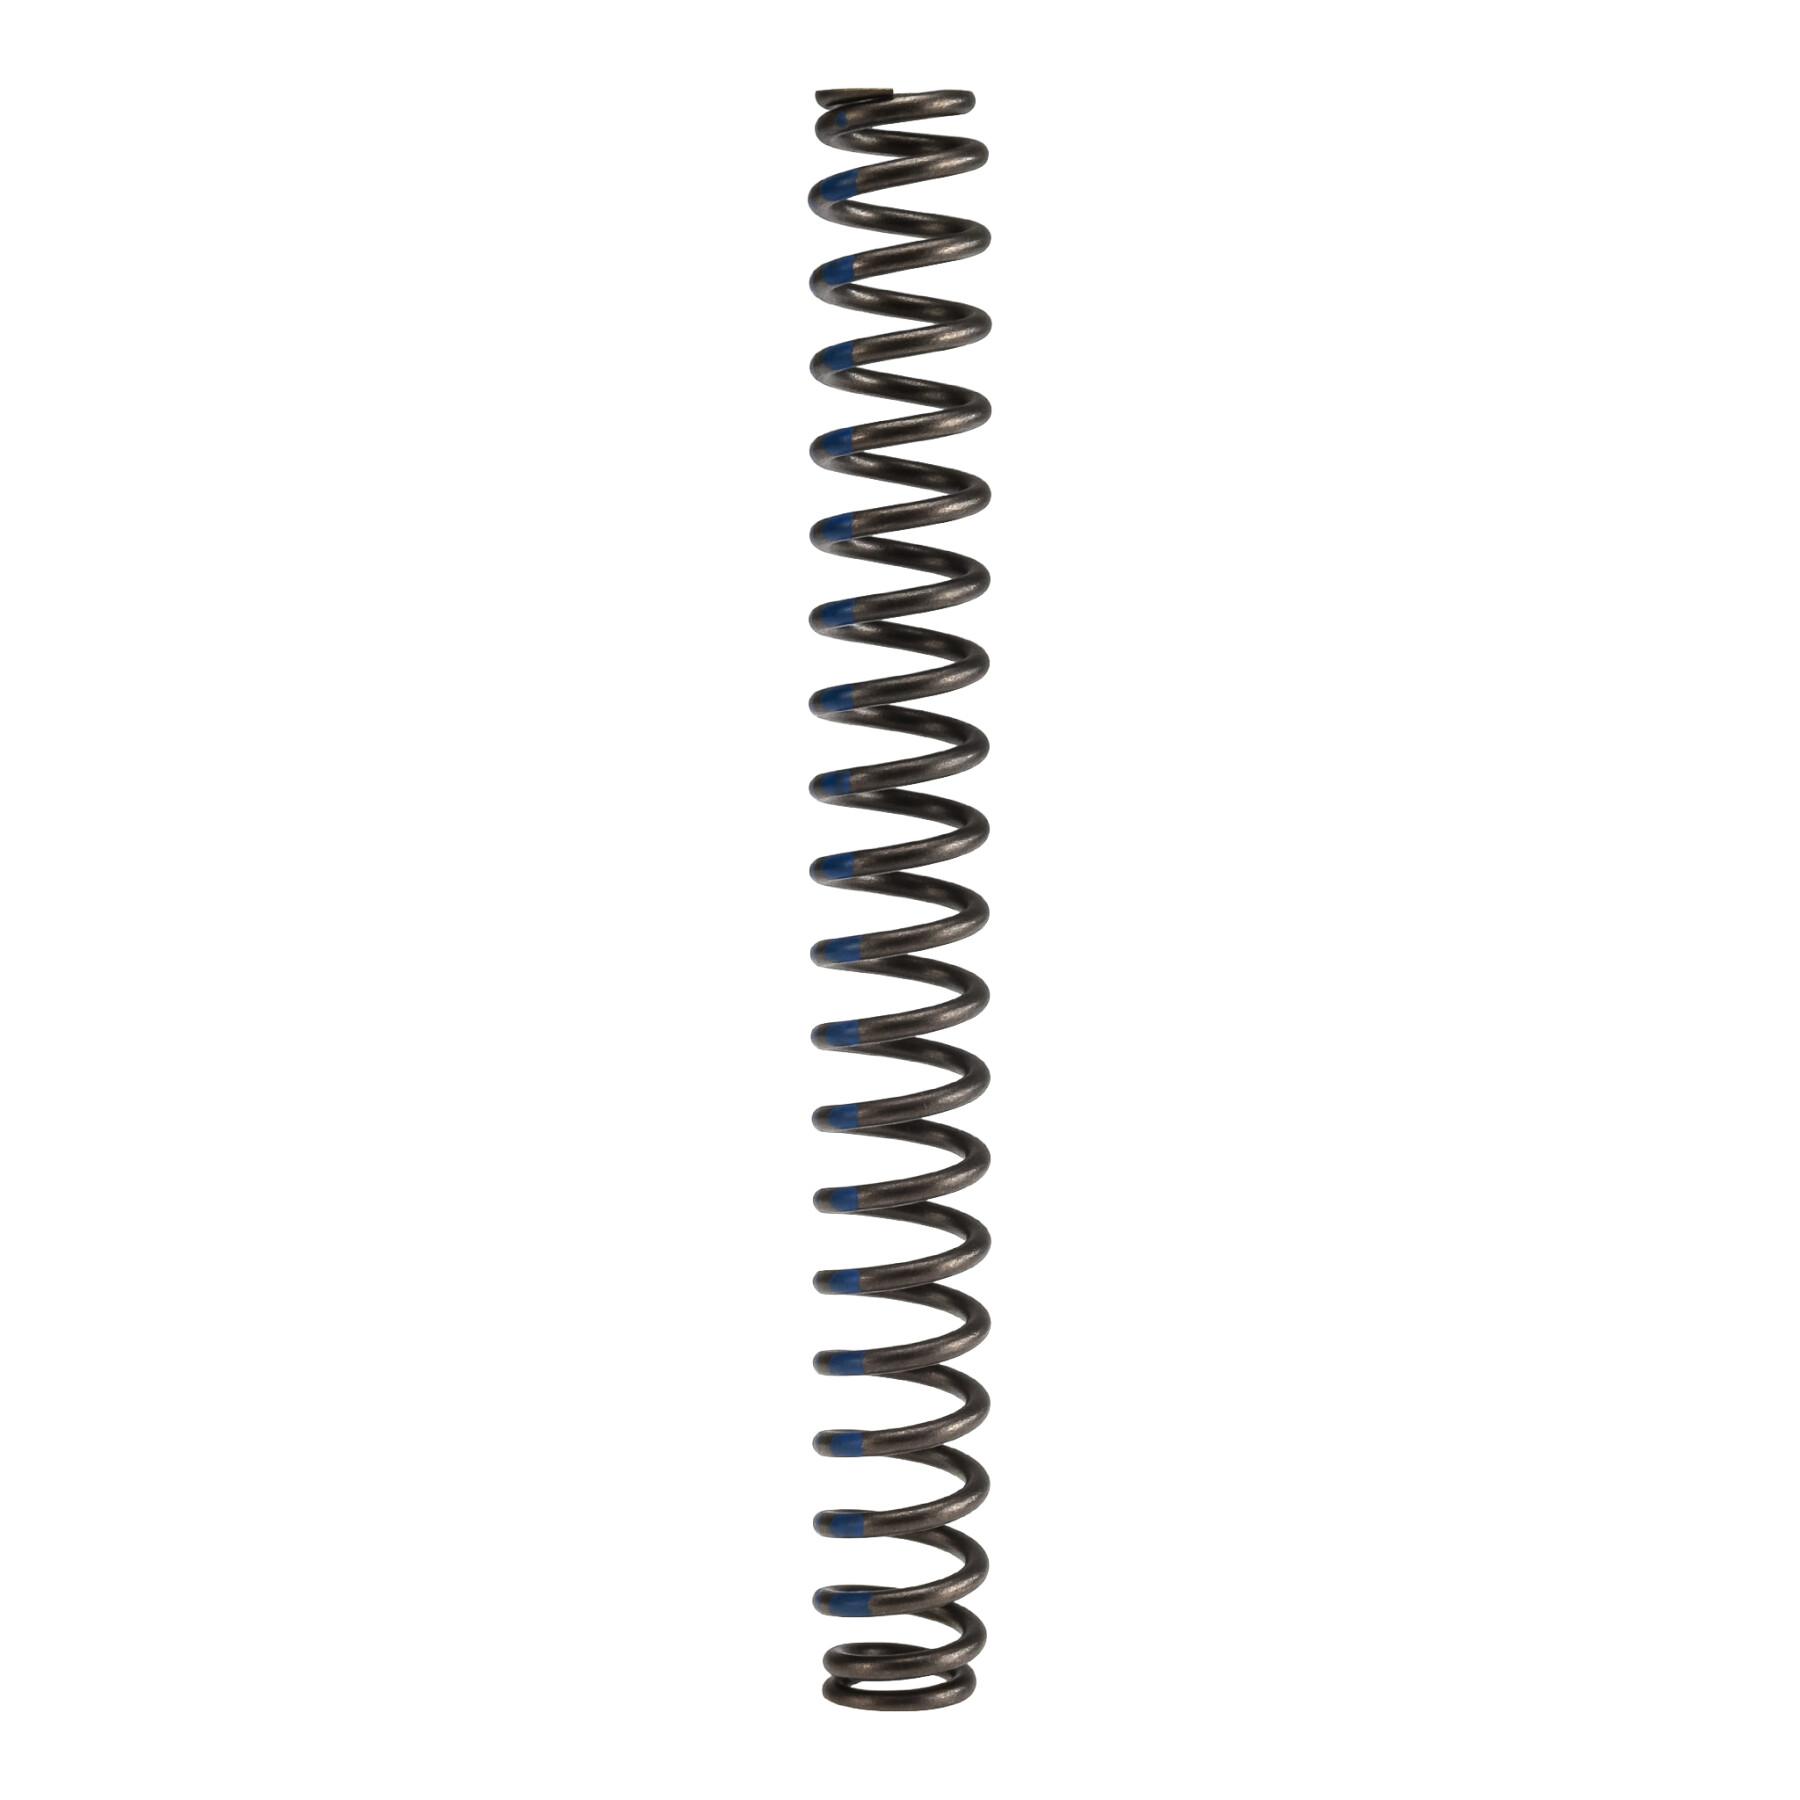 Fork spring Manitou CircusComp/Match Soft 50-70 Kg